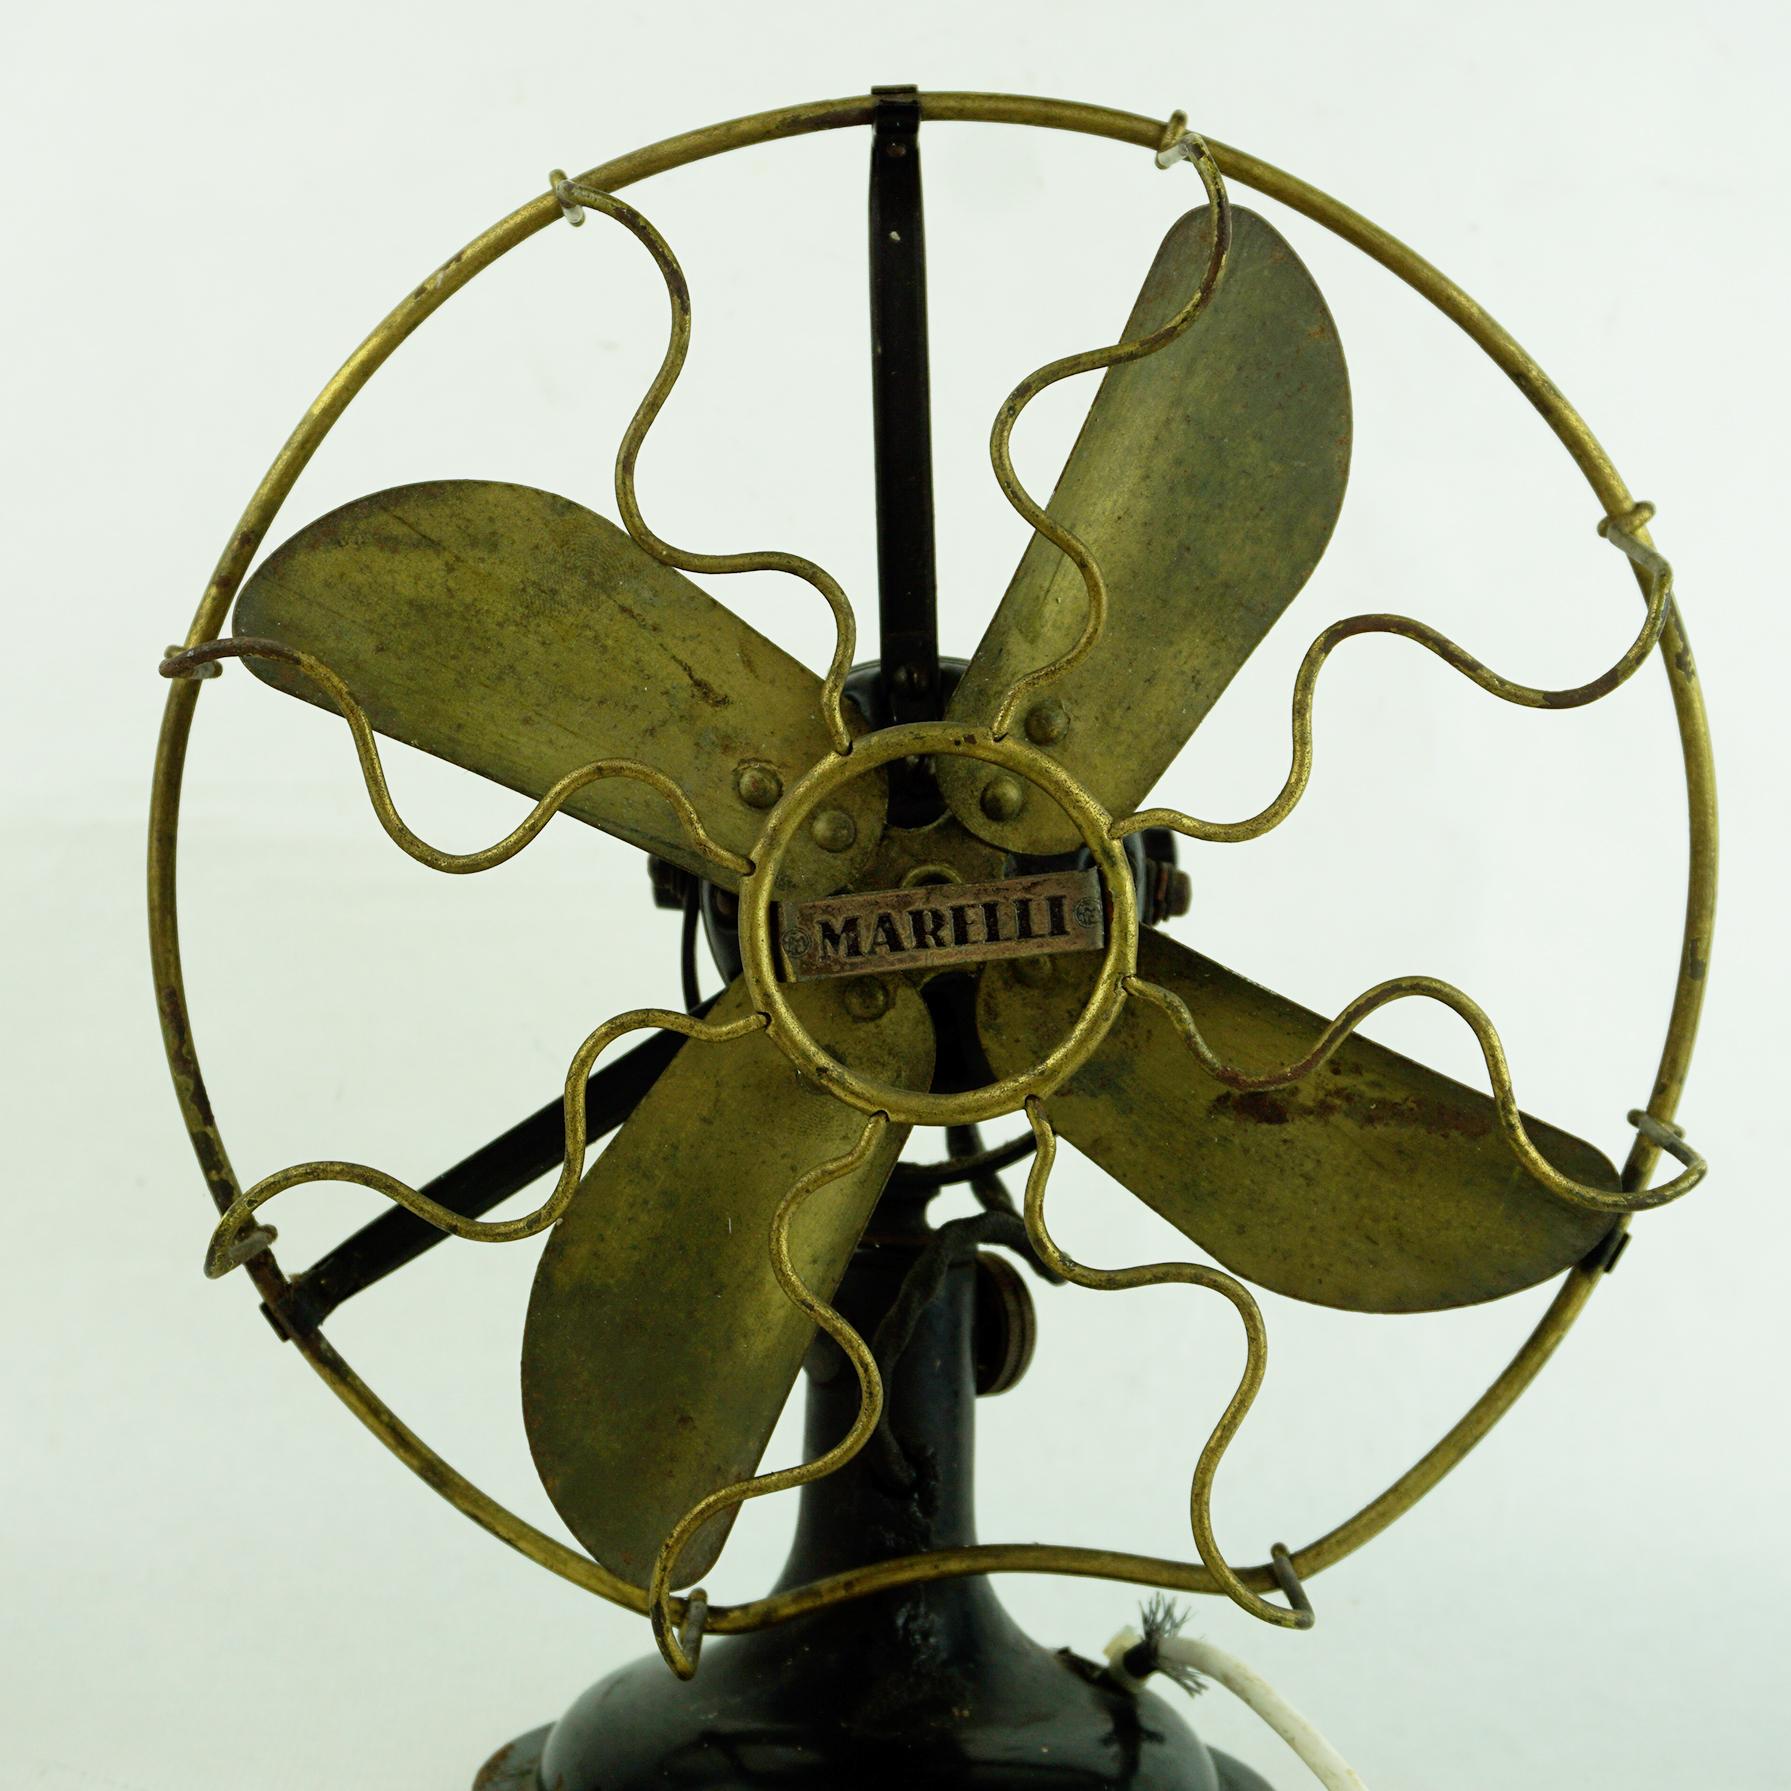 Metal 0riginal Vintage Industrial Art Deco Table Fan by Marelli Italy For Sale